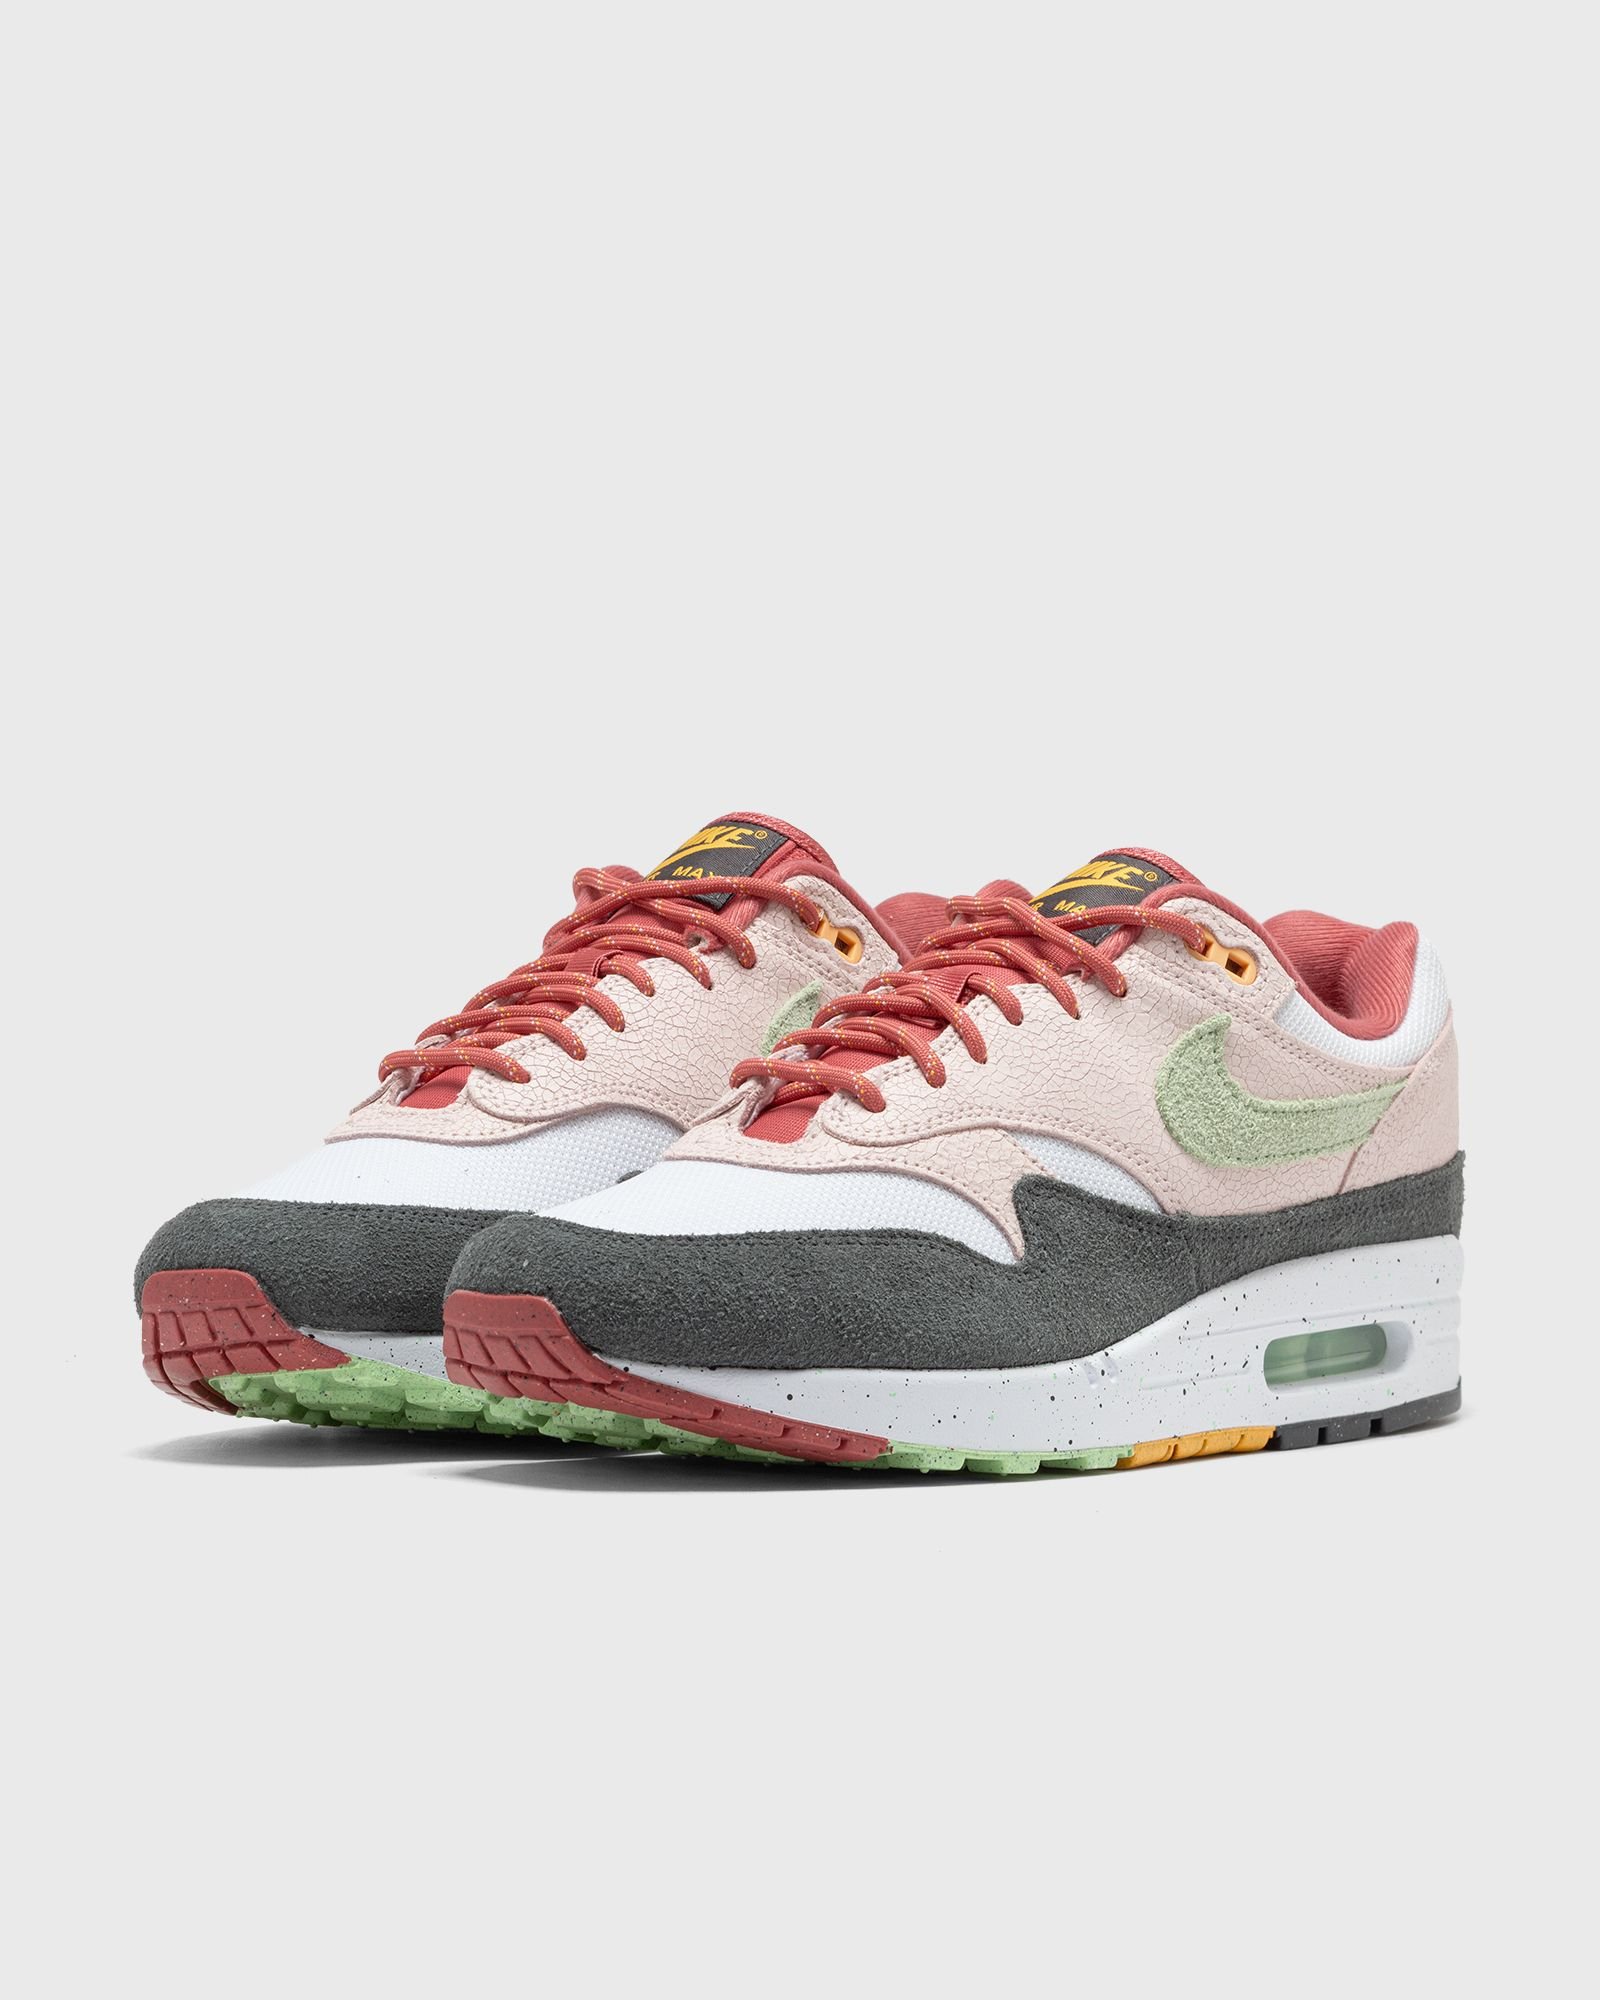 Air Max 1 "Cracked Multi-Color"